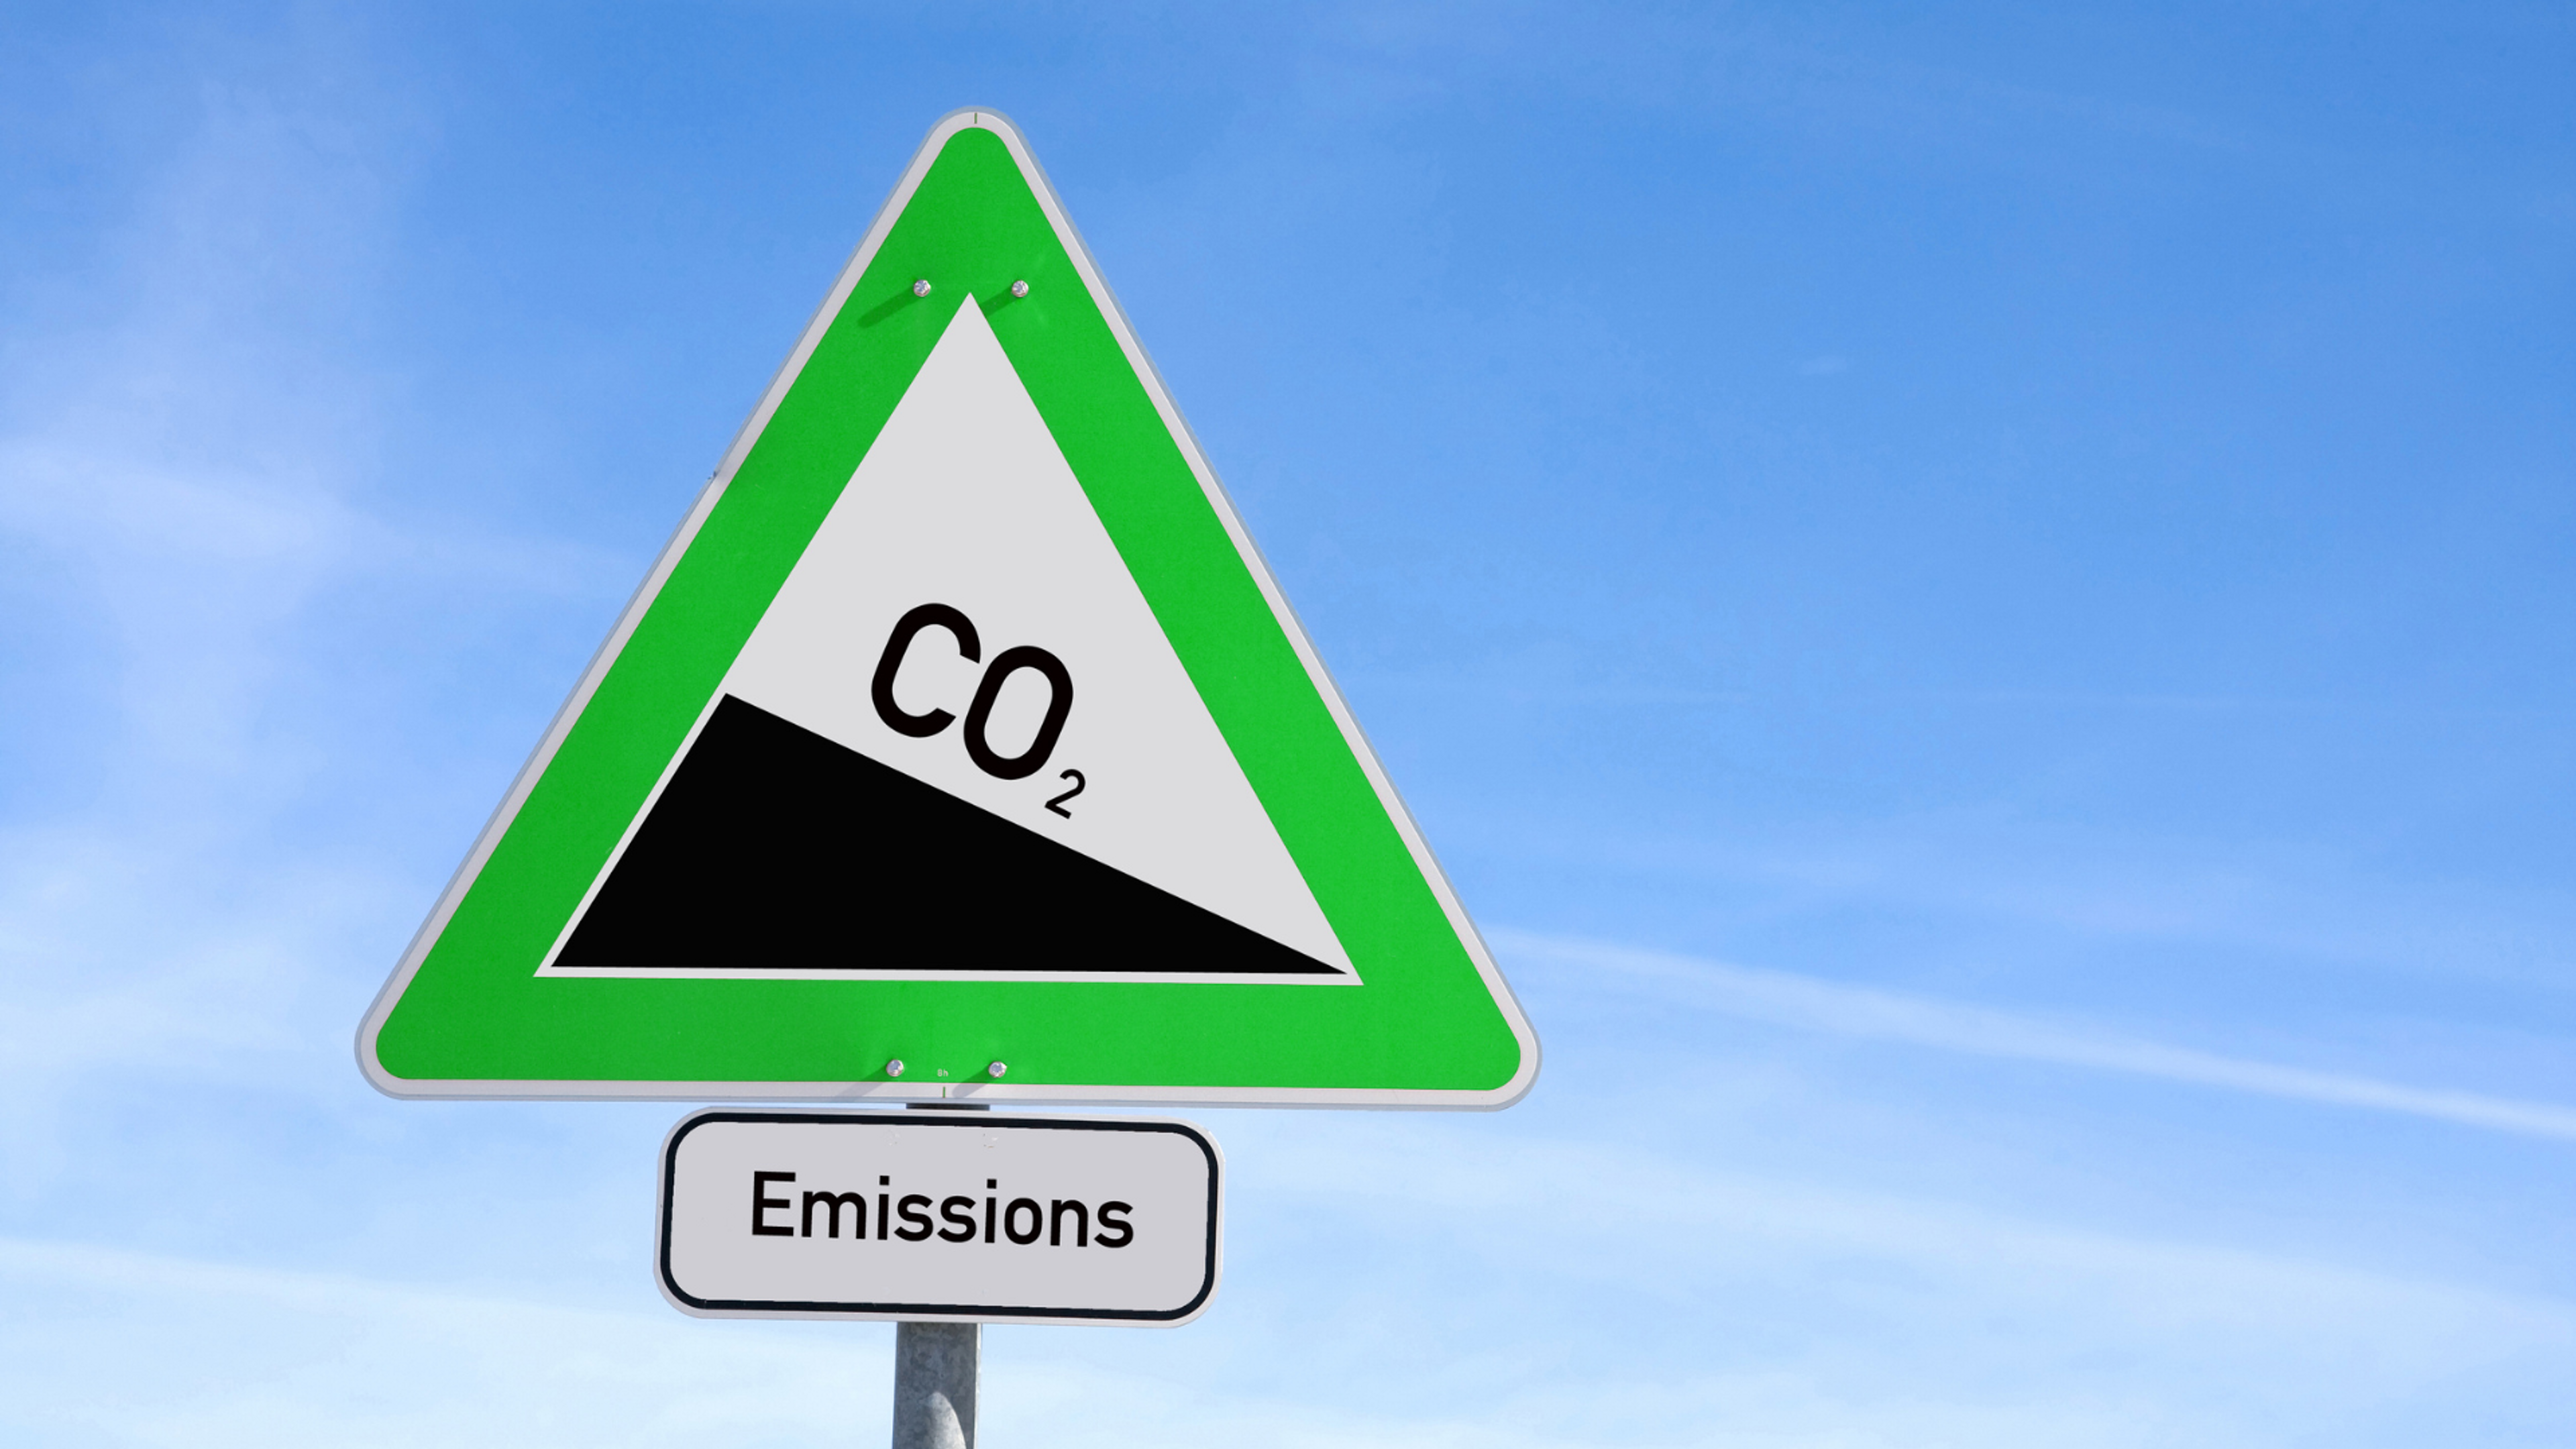 Traffic sign showing decrease in CO2 emissions